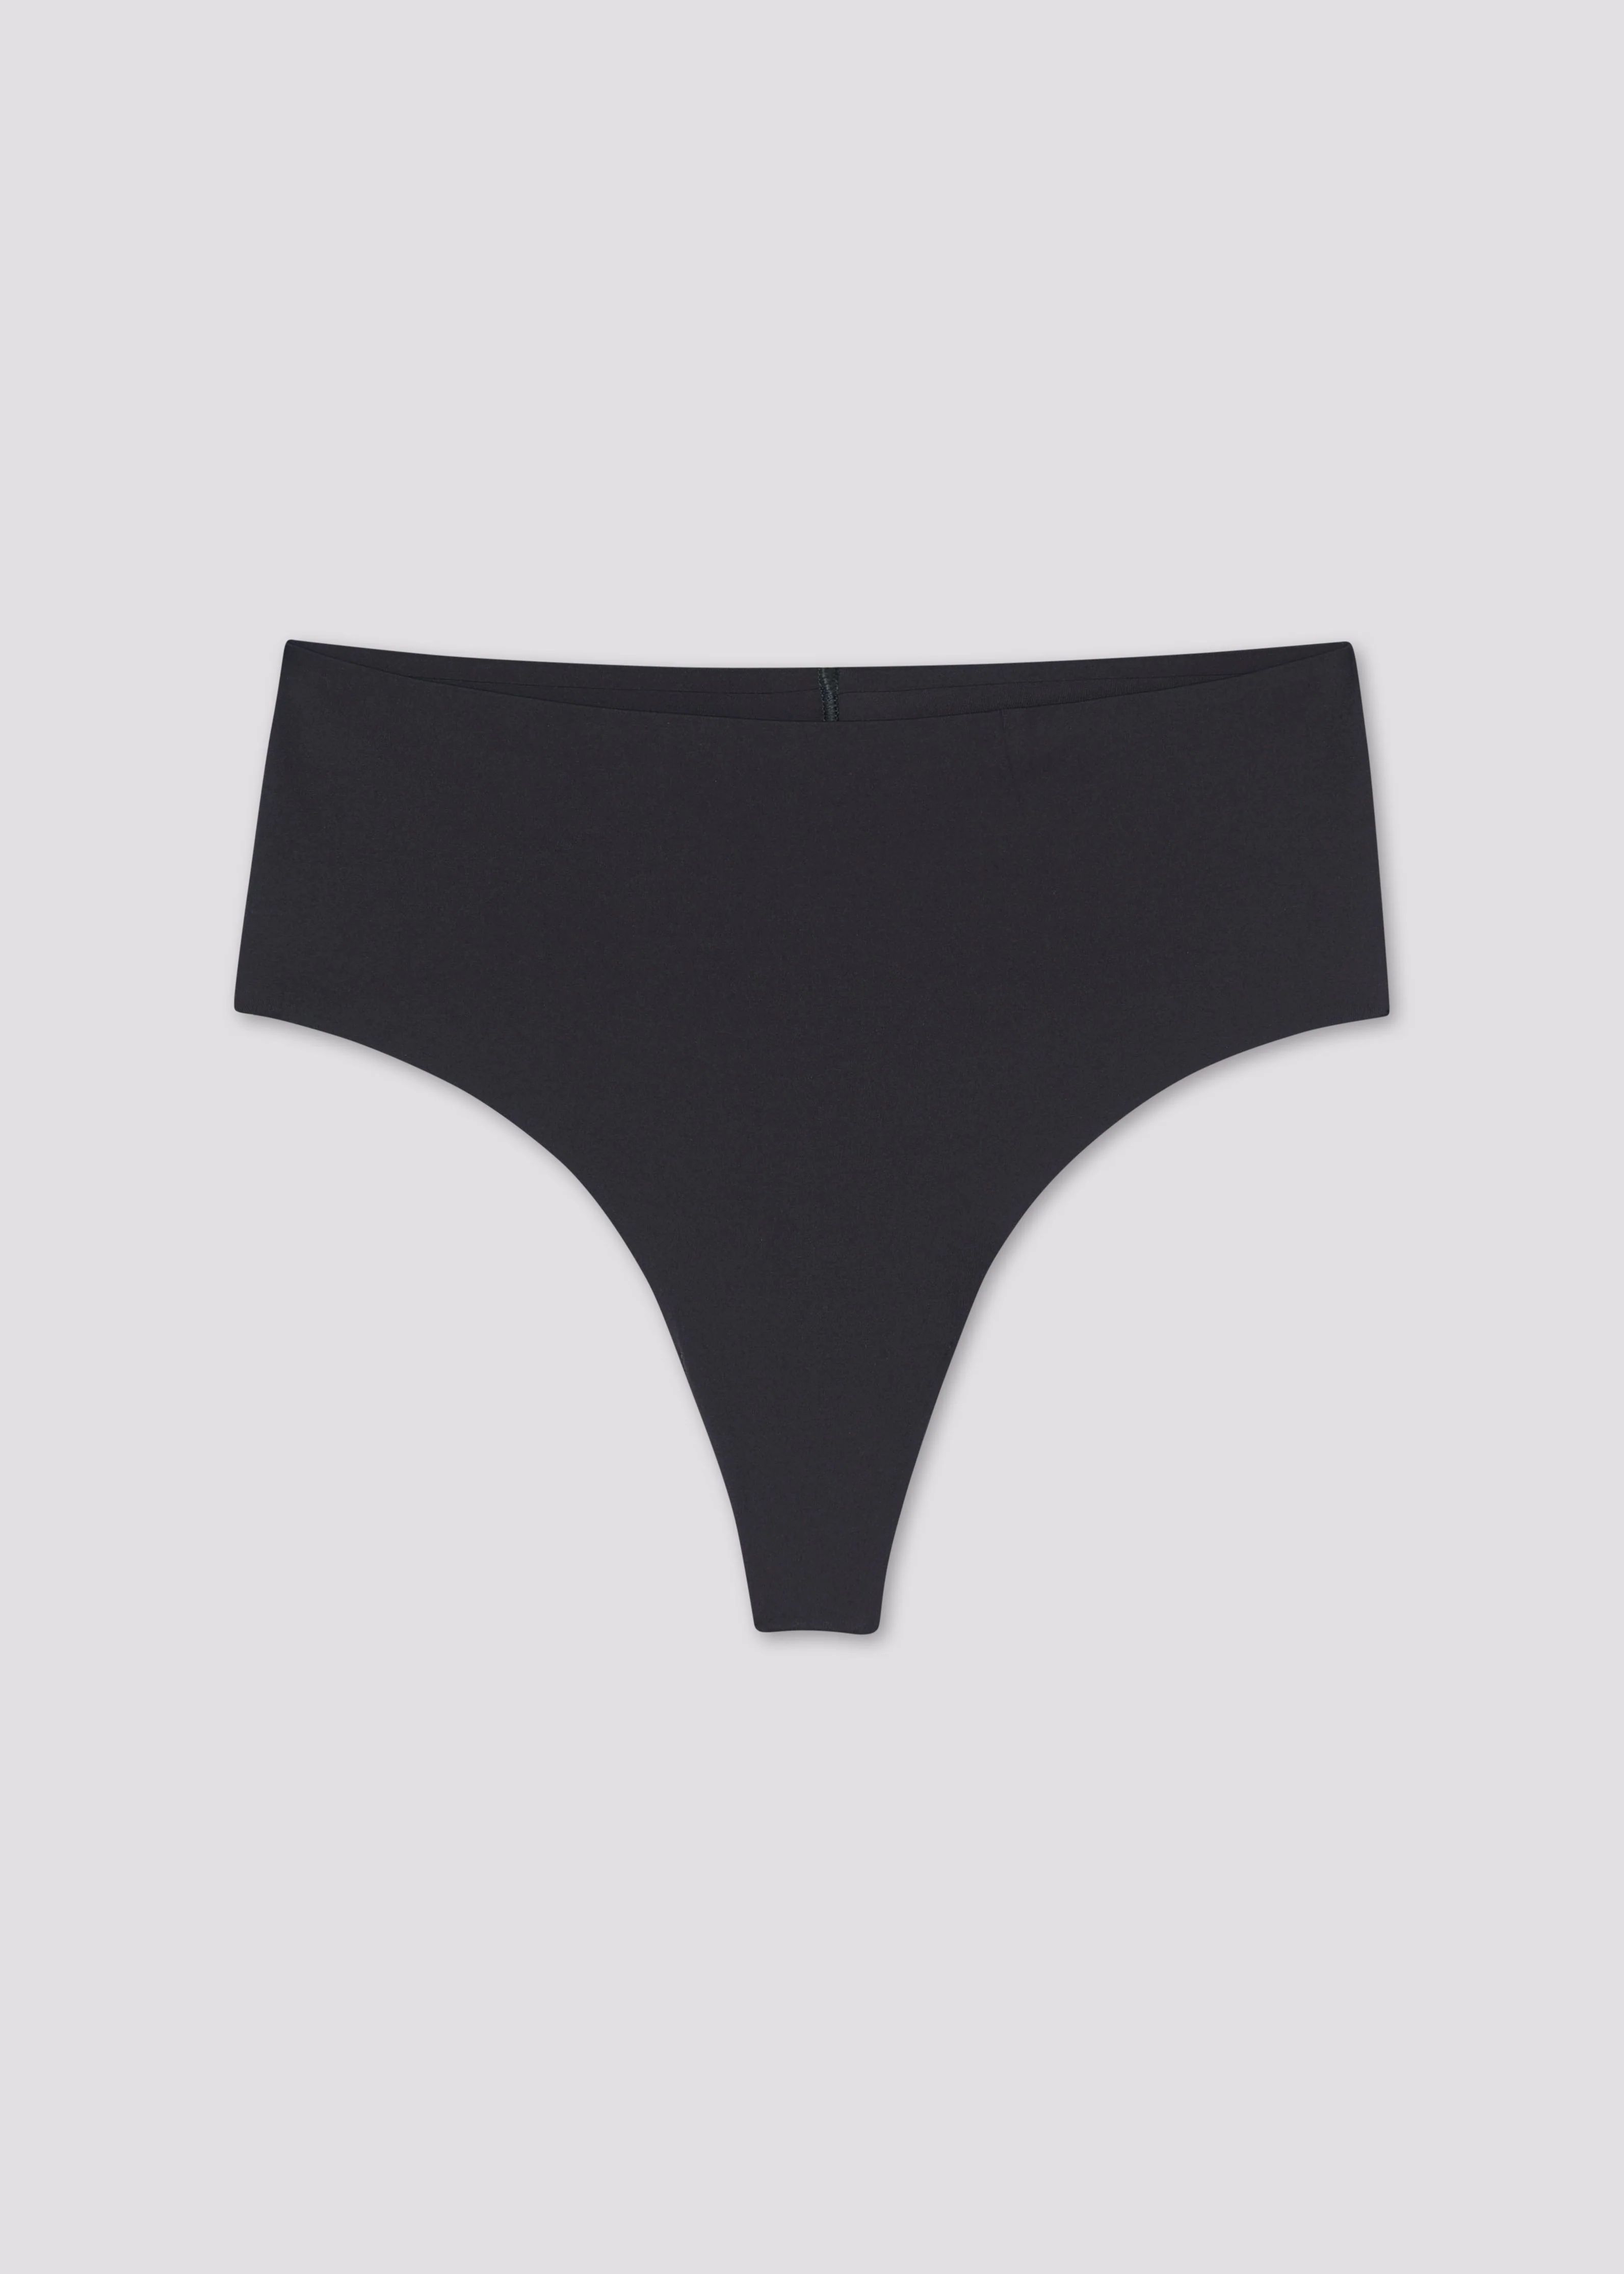 Raven High-Rise Thong | Girlfriend Collective